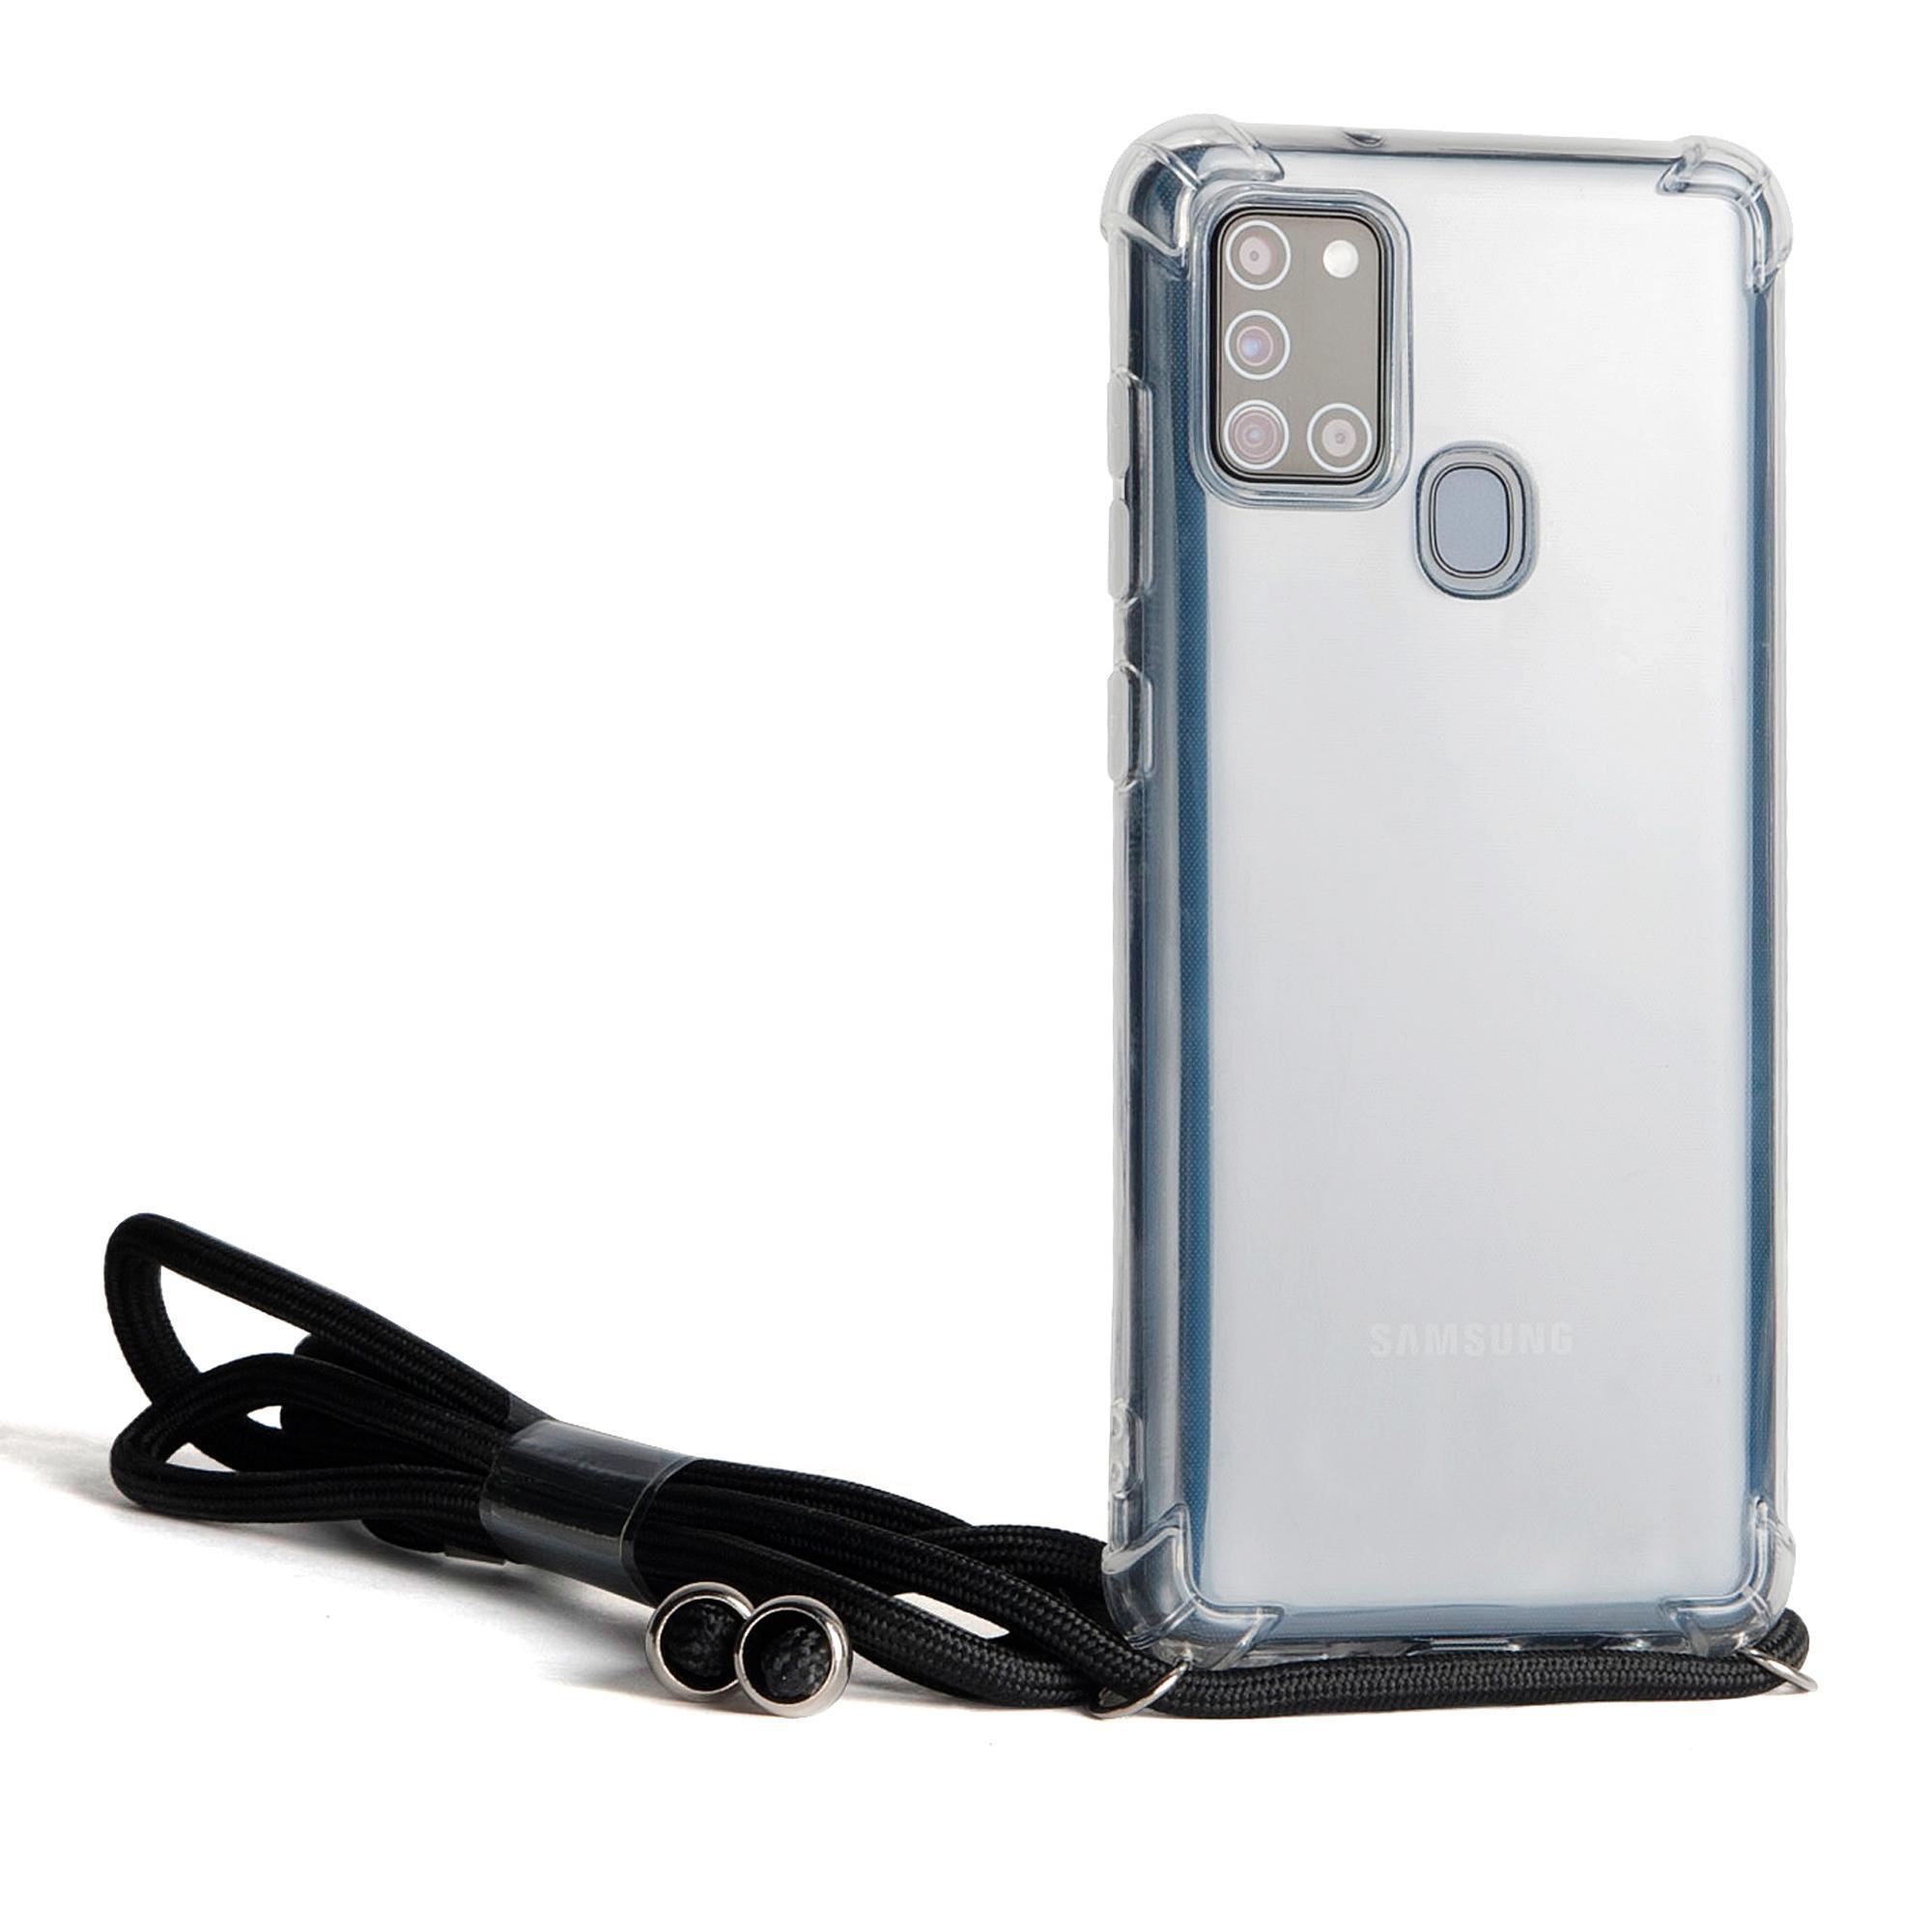 Samsung, ISY Backcover, A21S, ISC-5302, Transparent Galaxy